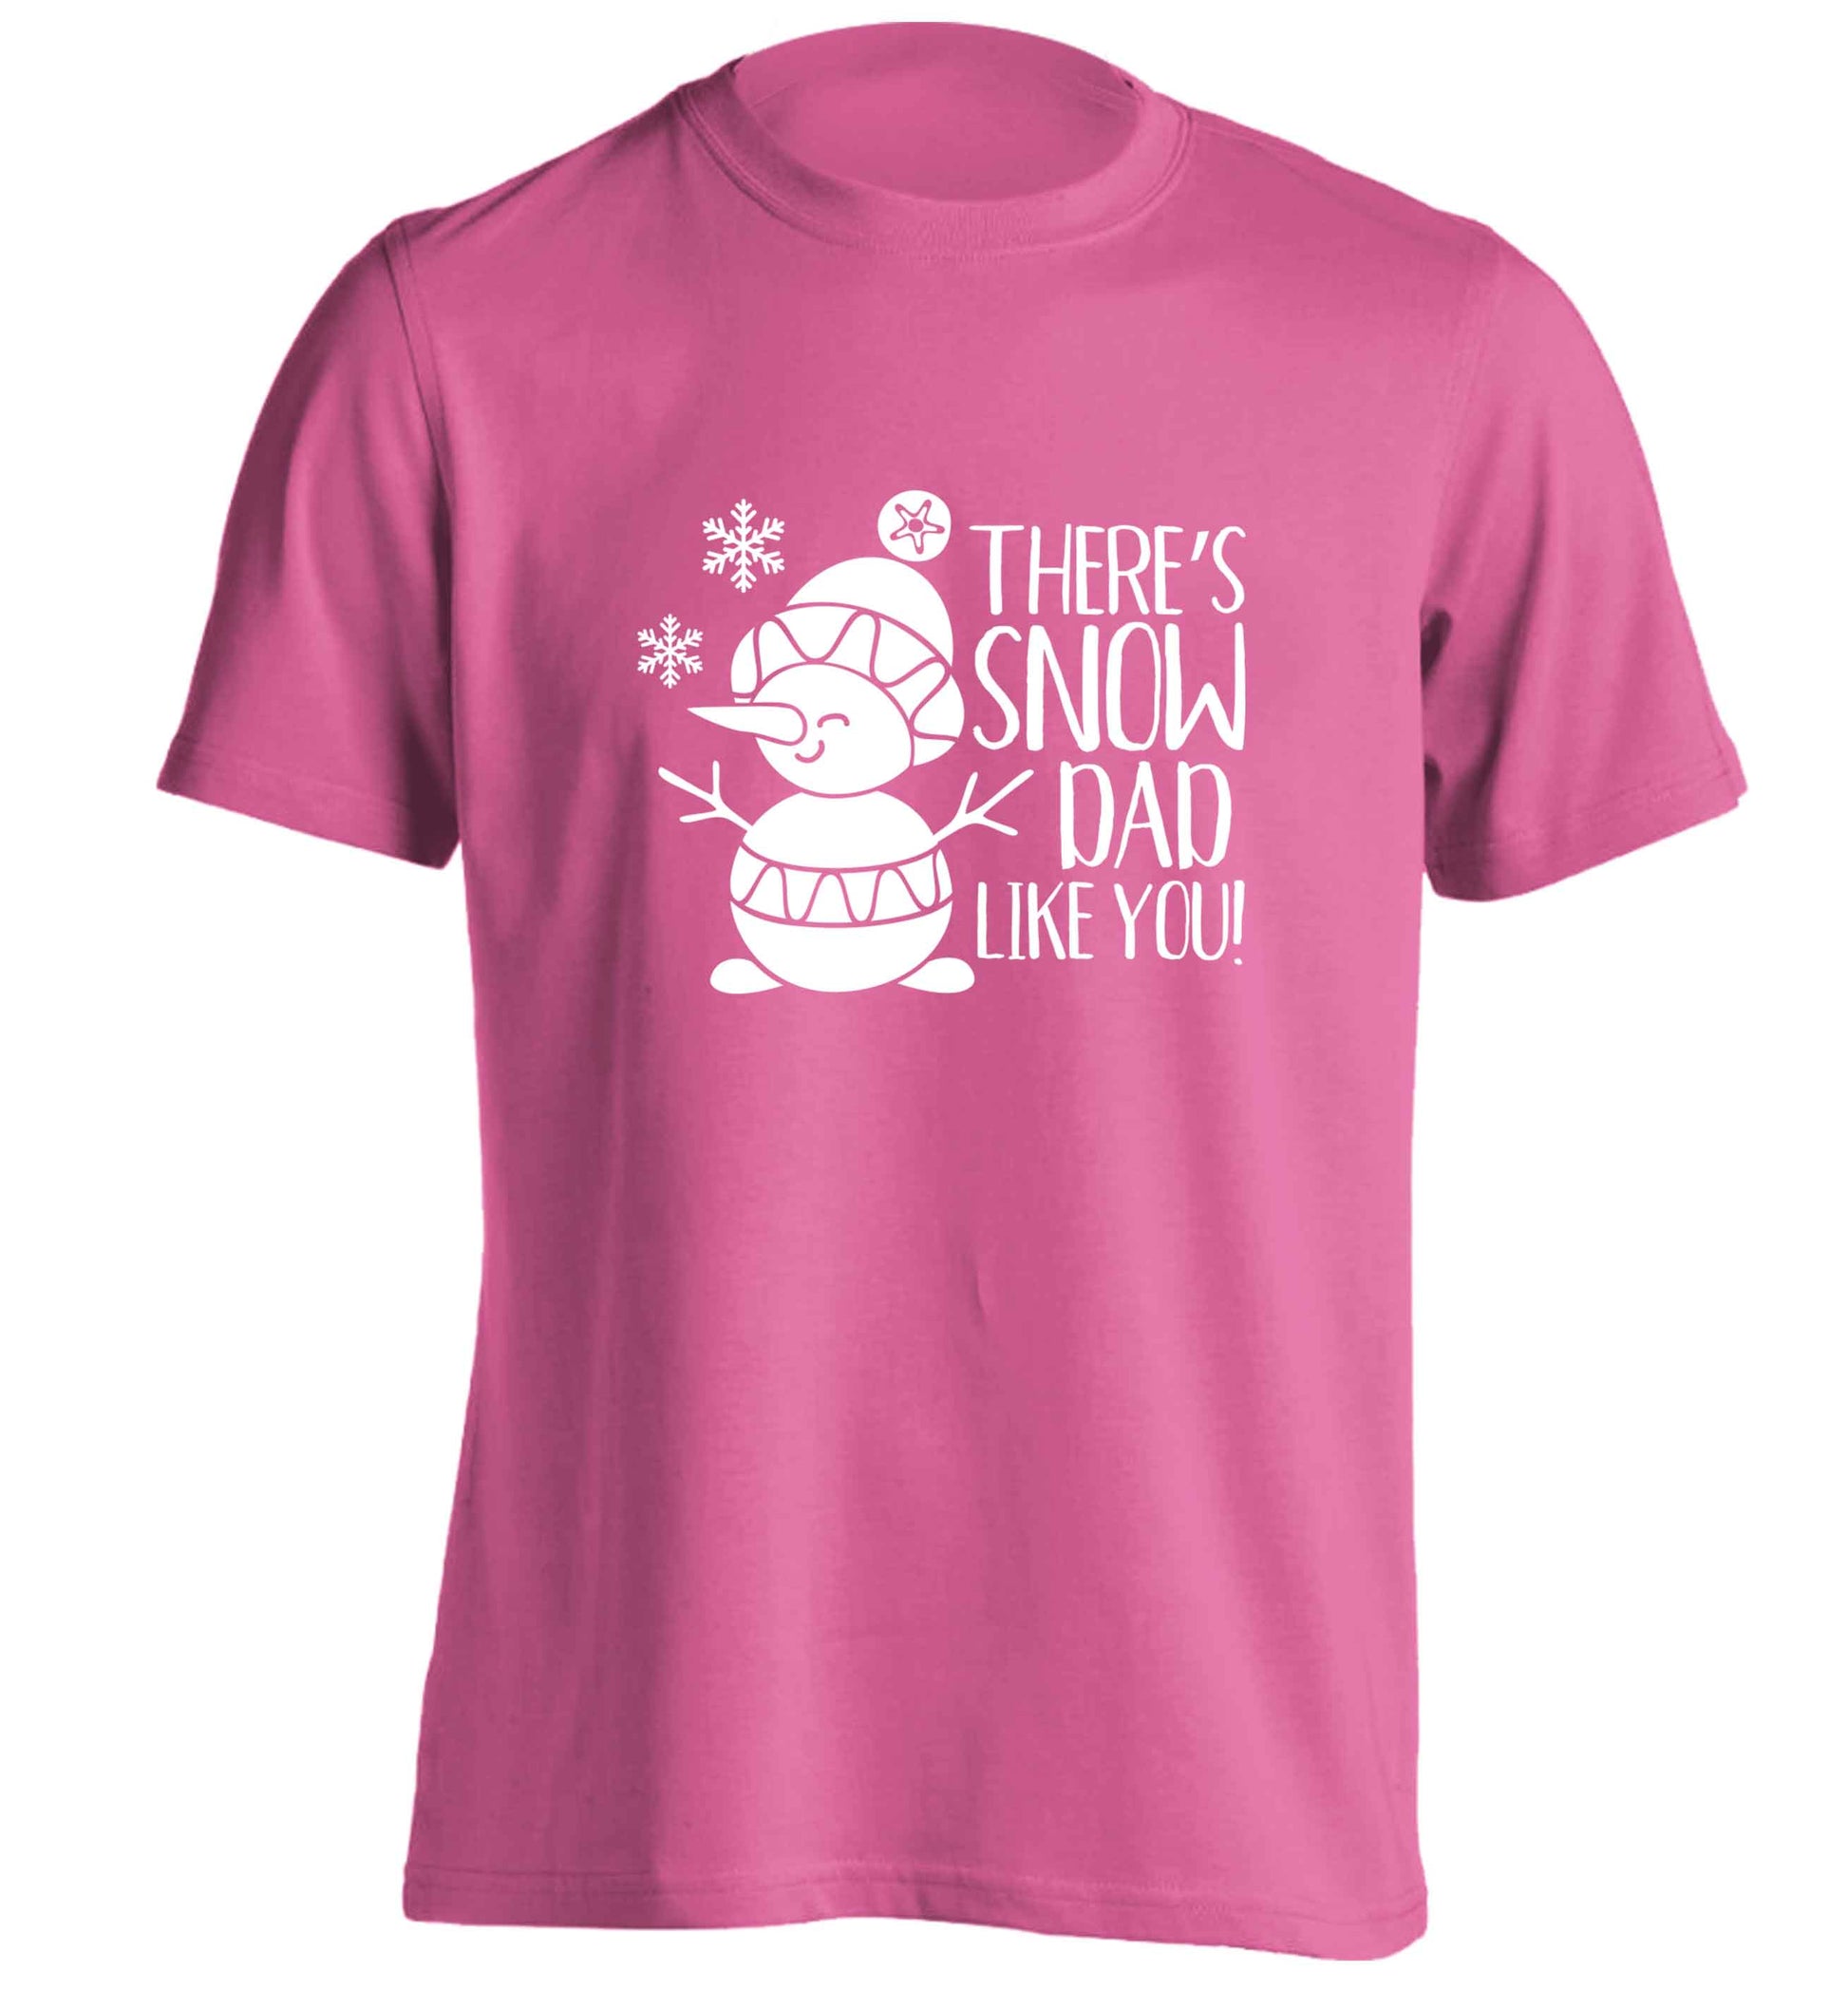 There's snow dad like you adults unisex pink Tshirt 2XL